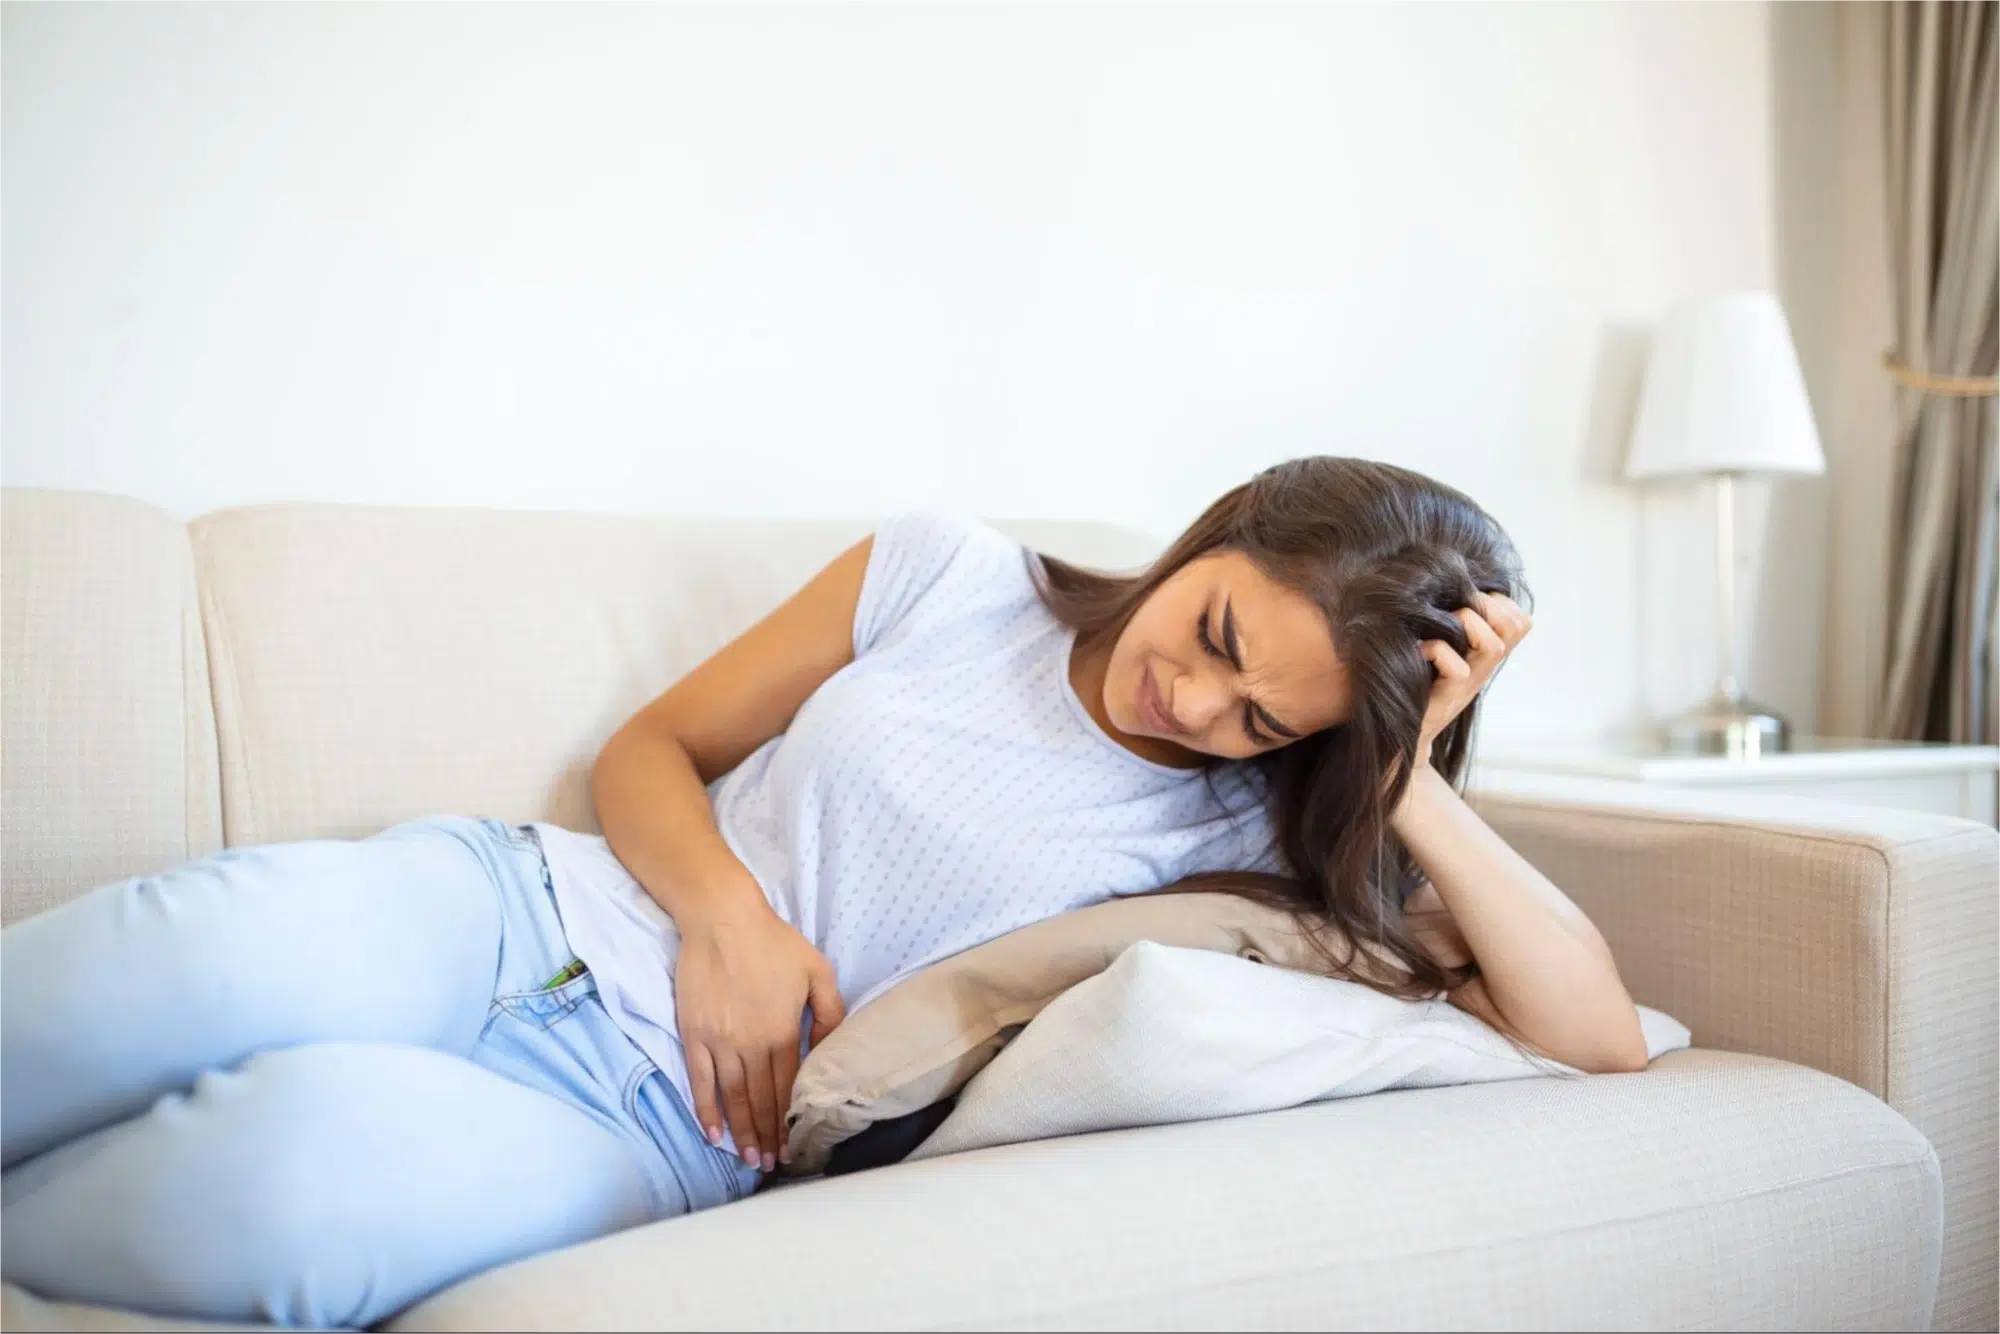 What’s Irritable Bowel Syndrome? Here’s What You Should Know